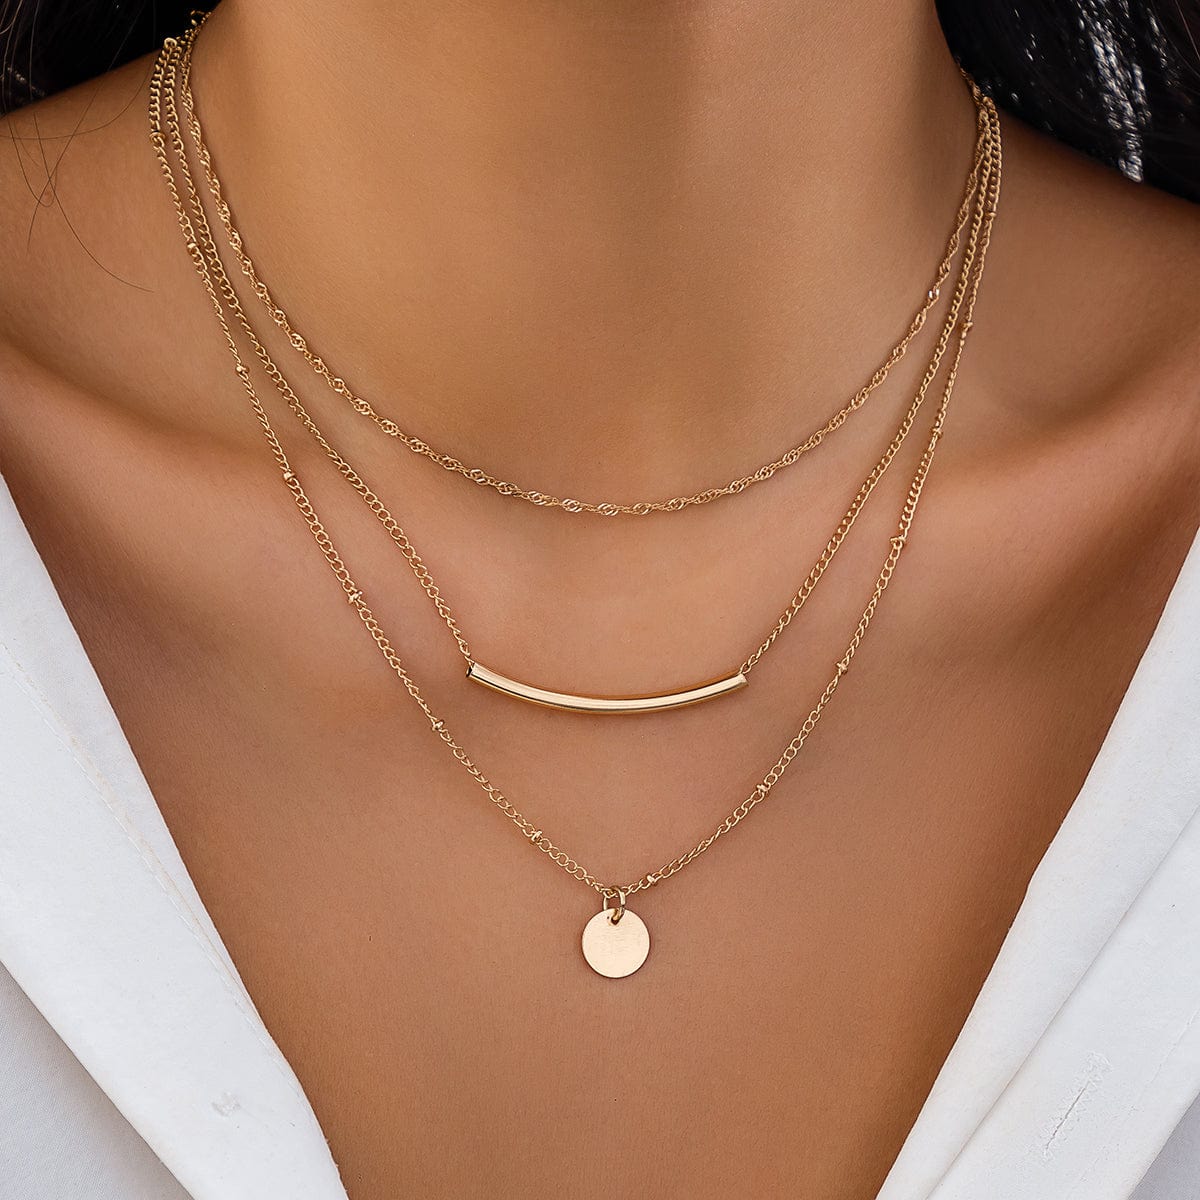 Trendy Layered Curved Bar Round Disk Pendant Cable Chain Necklace Set - ArtGalleryZen